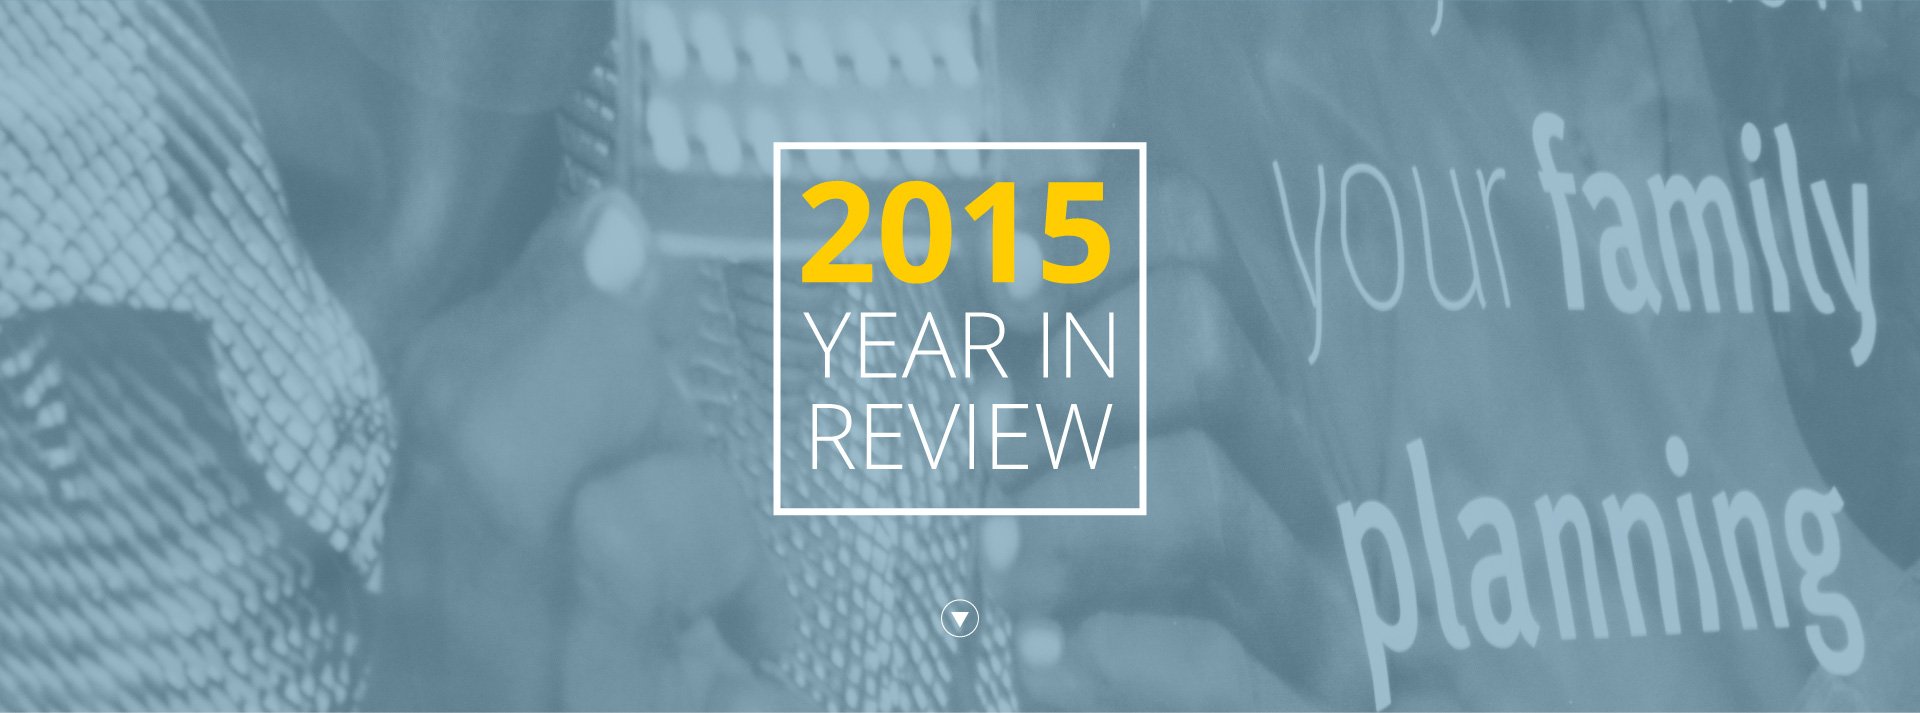 Year-in-review-2015